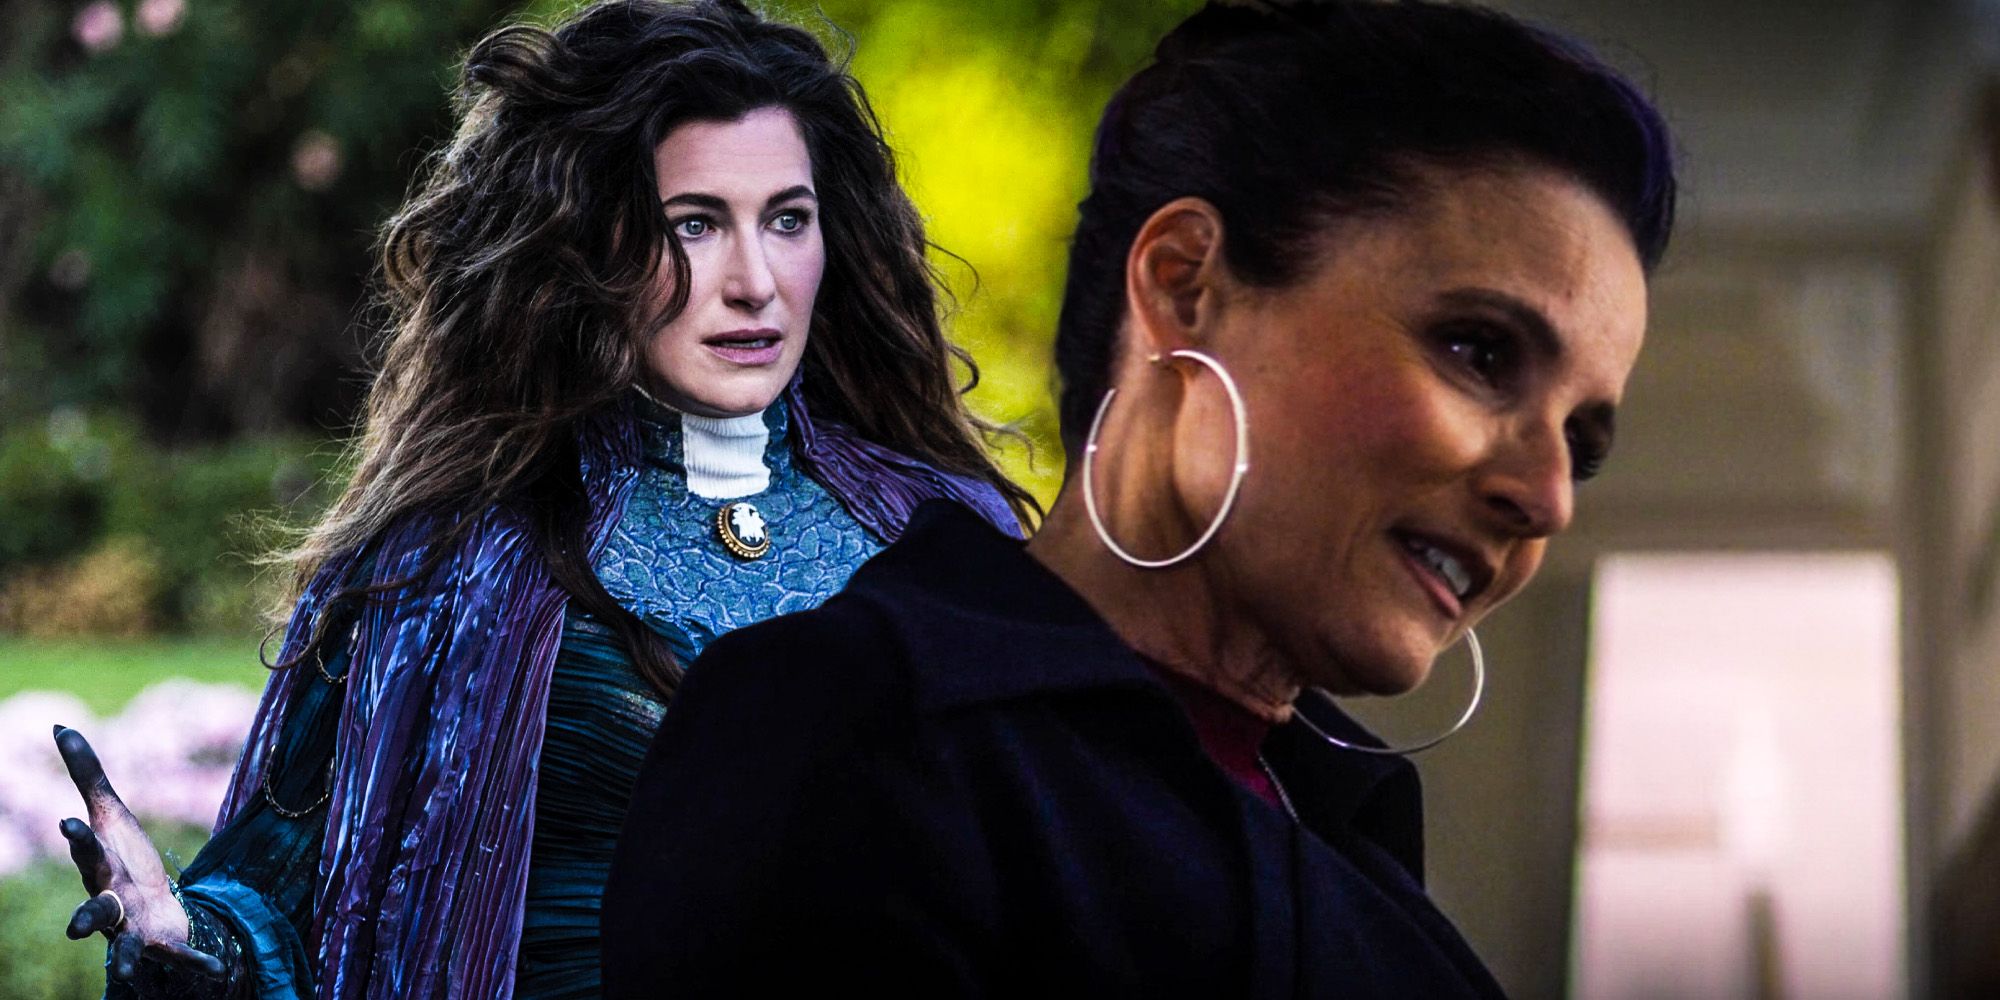 Split image of Contessa Valentina Allegra De Fontaine and Agatha Harkness from MCU